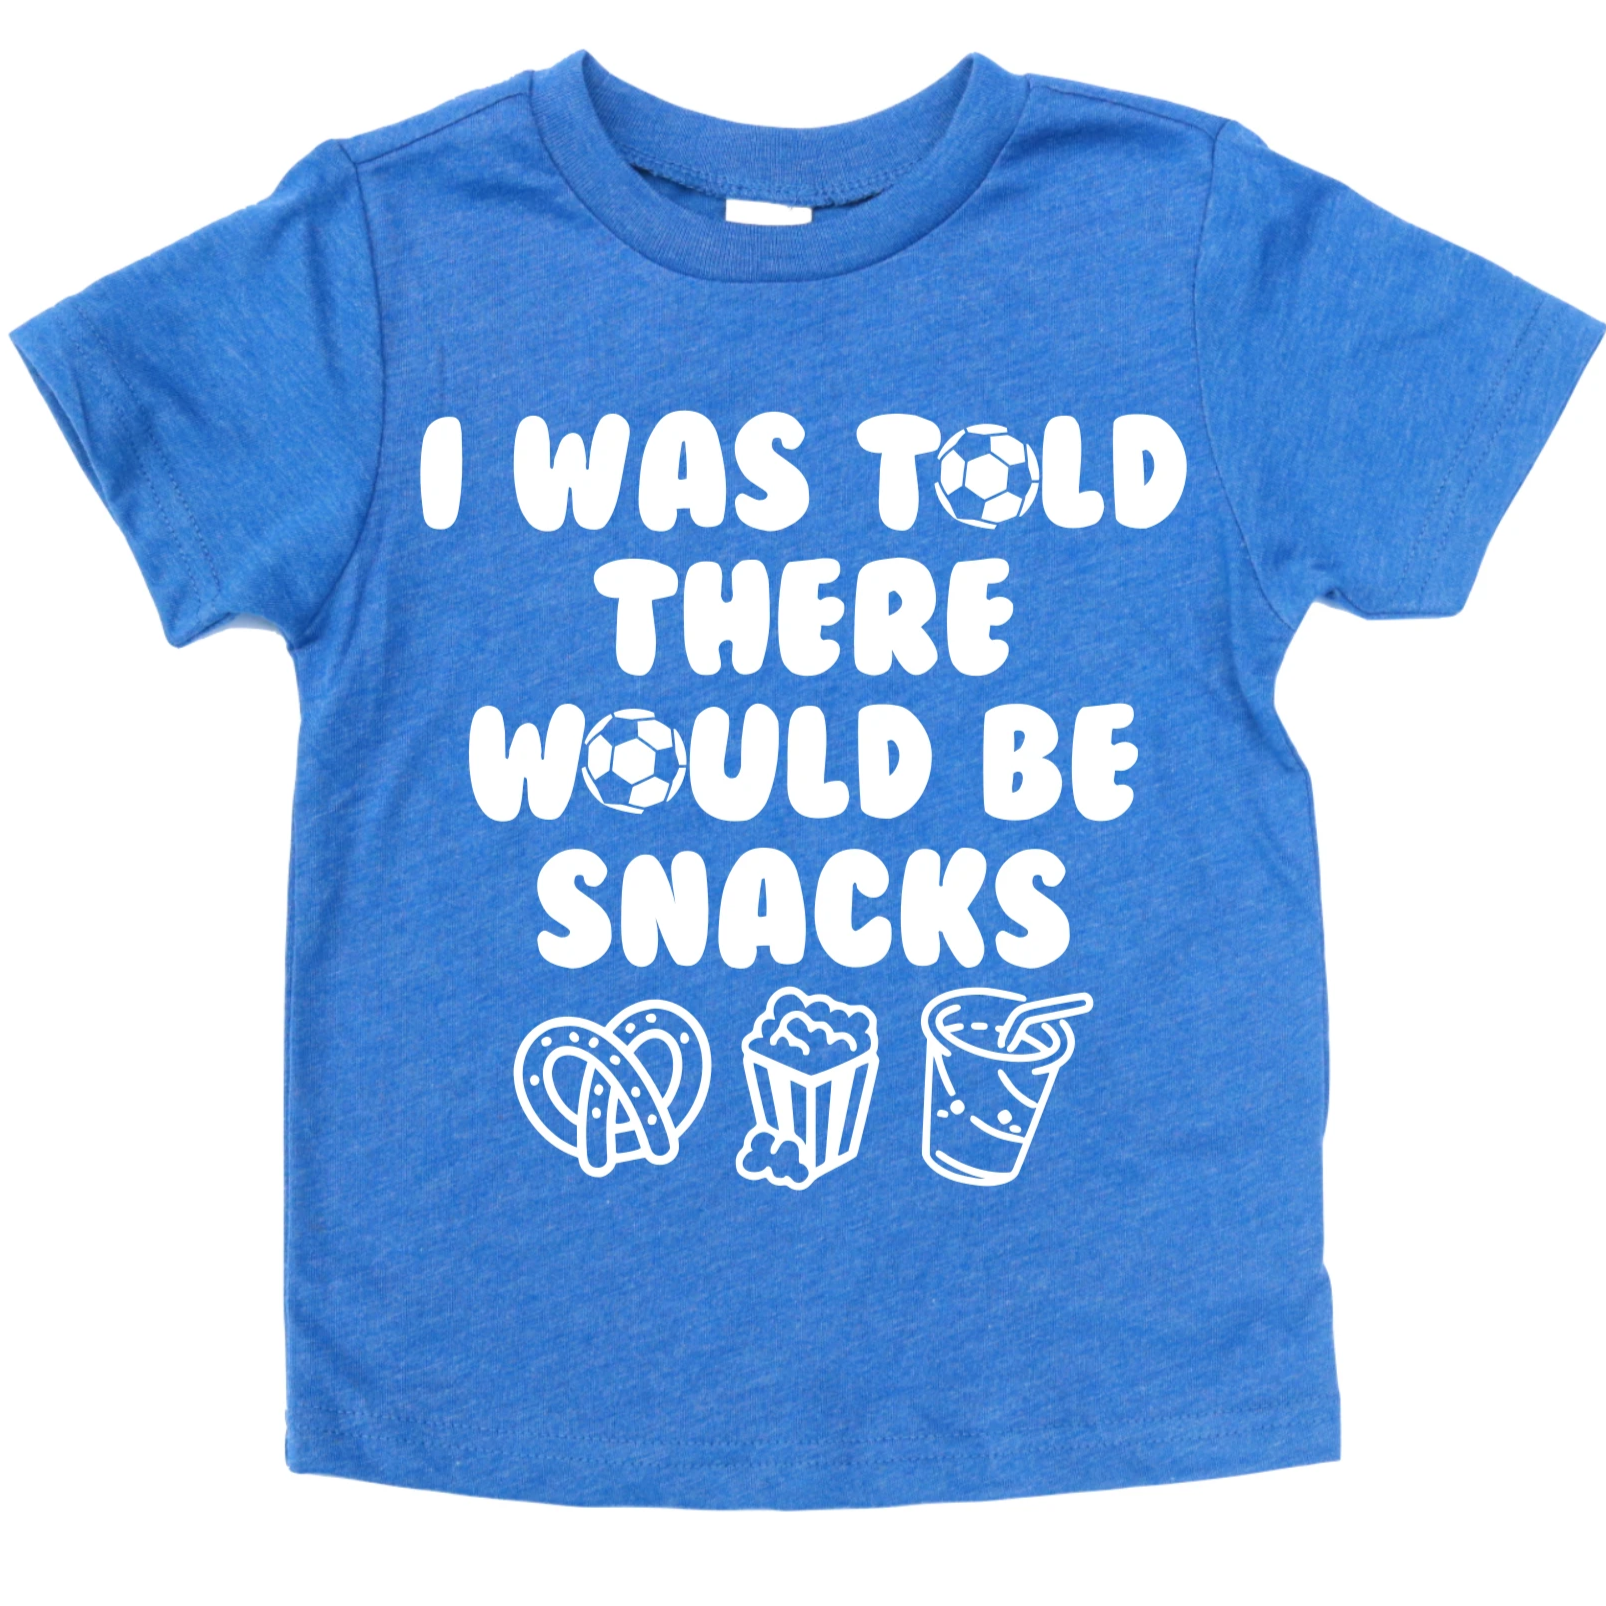 I WAS TOLD THERE WOULD BE SNACKS (SOCCER EDITION) KIDS SHIRT